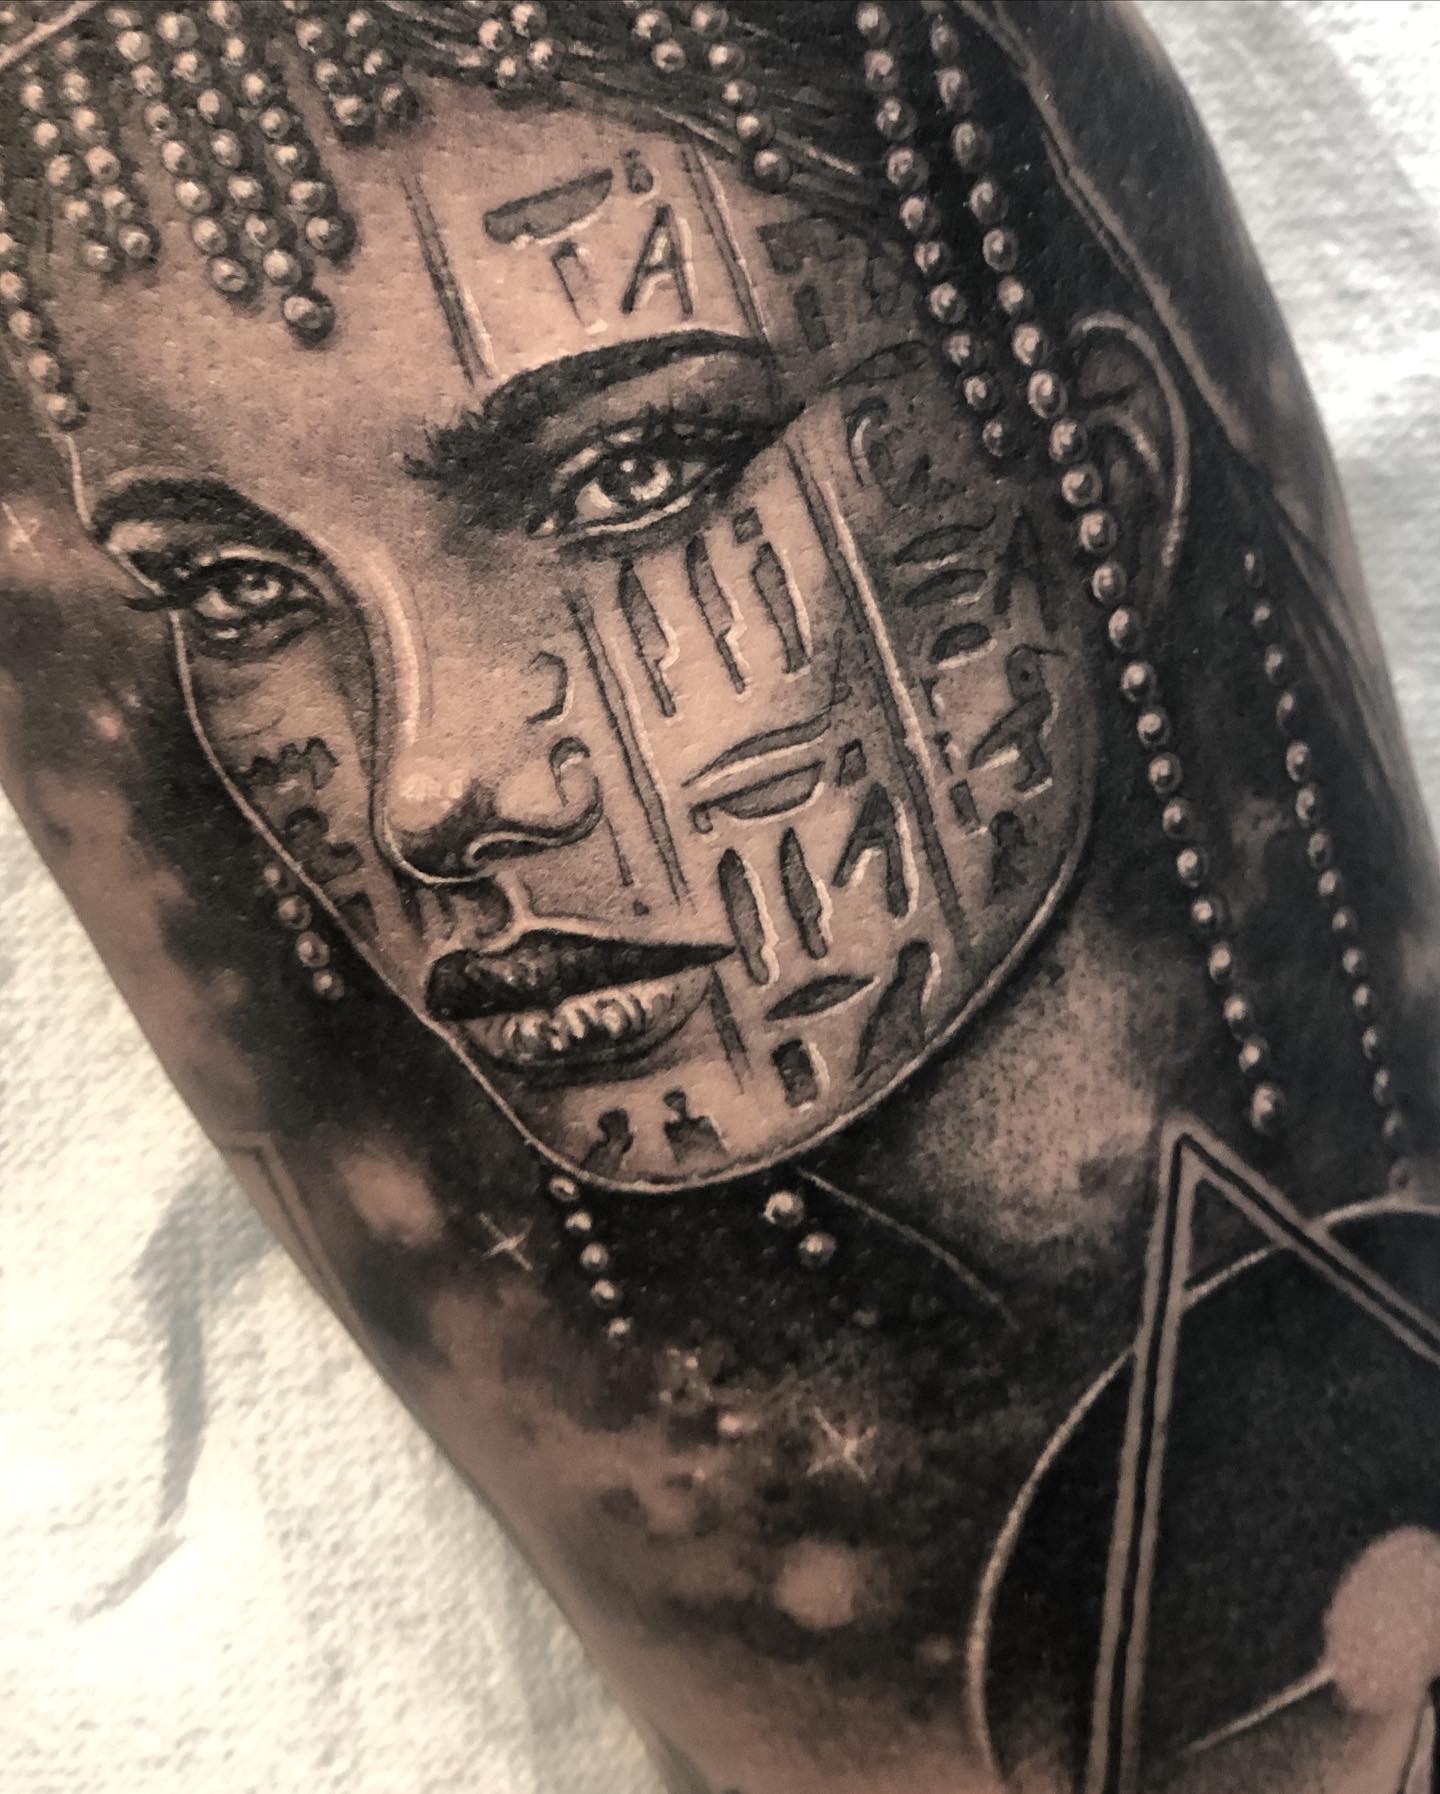 Egyptian Tattoo by Mark Gray at Nexus Collective Studio